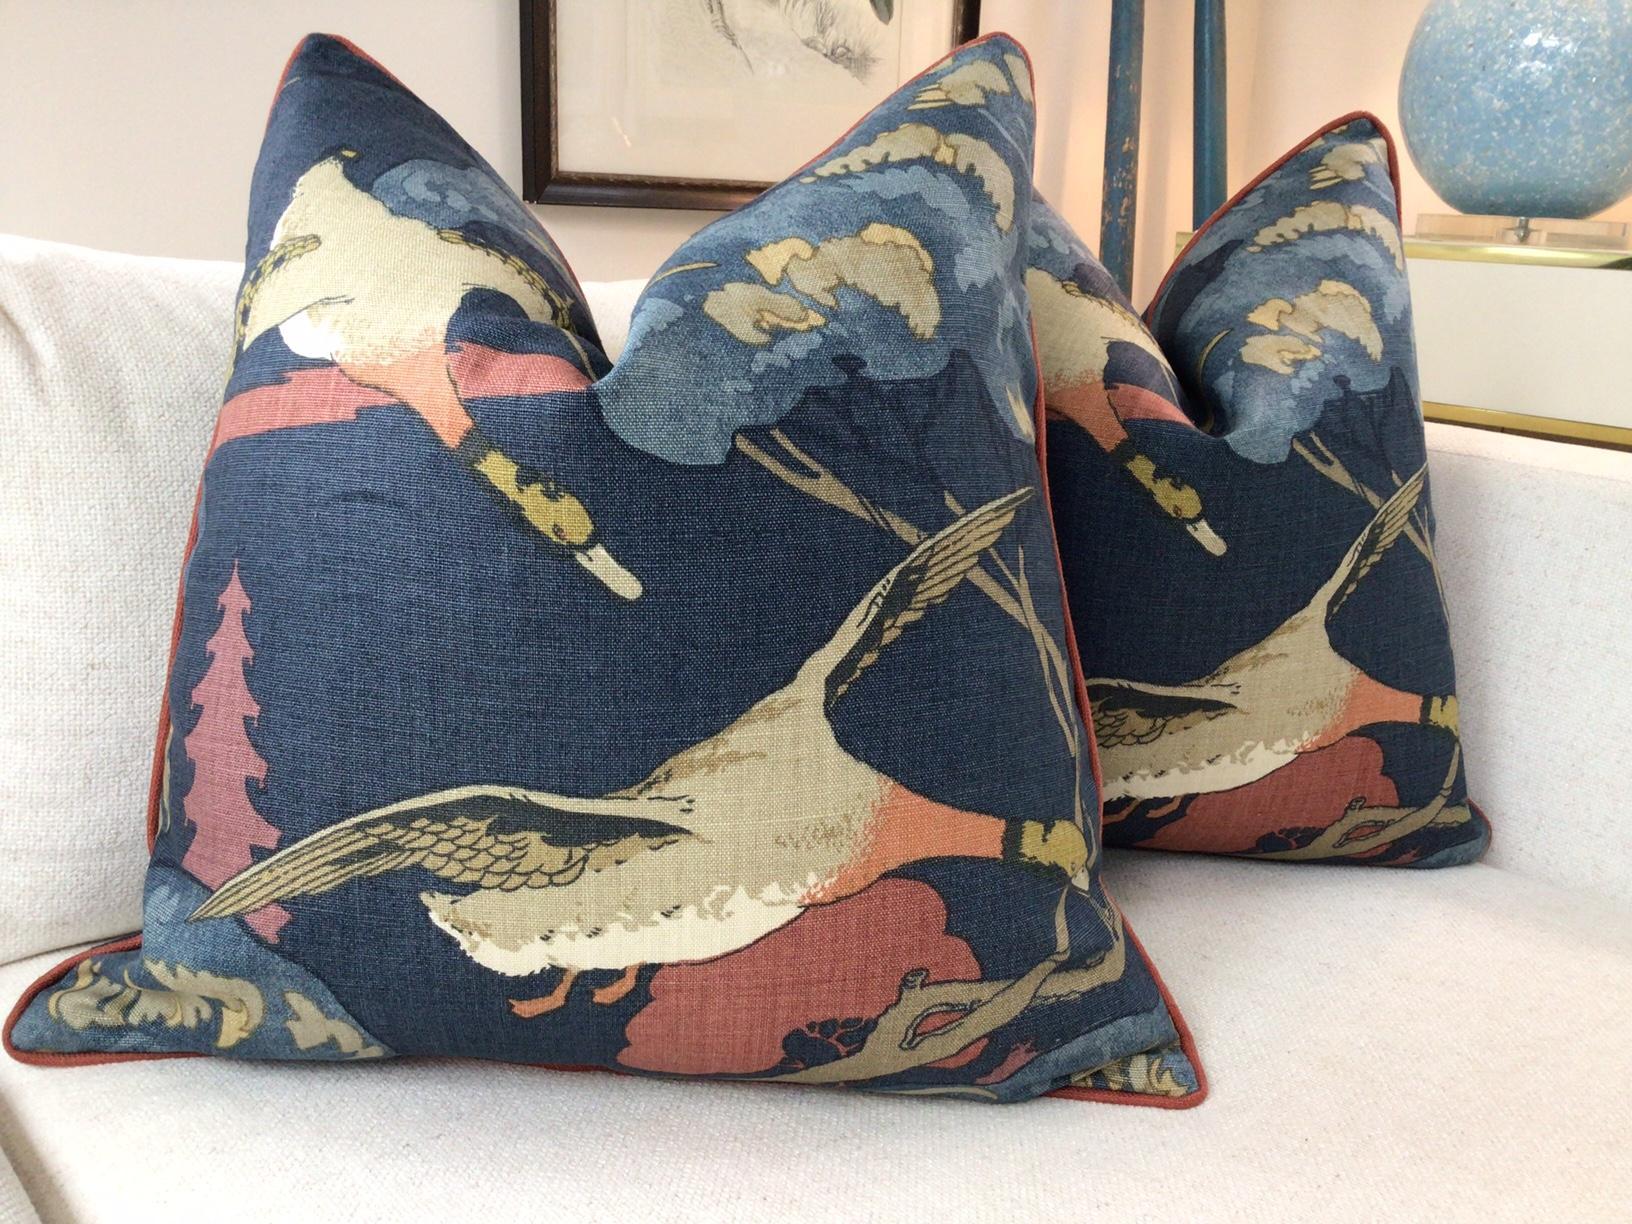 BEAUTIFUL and reminiscent of an English country Manor home, Lee Jofa's “Flying Ducks” is a lovely pattern from Mulberry and features ducks in flight in rich colors of khaki- tan, coral orange, gold, and paprika and paprika cord. This exquisite scene